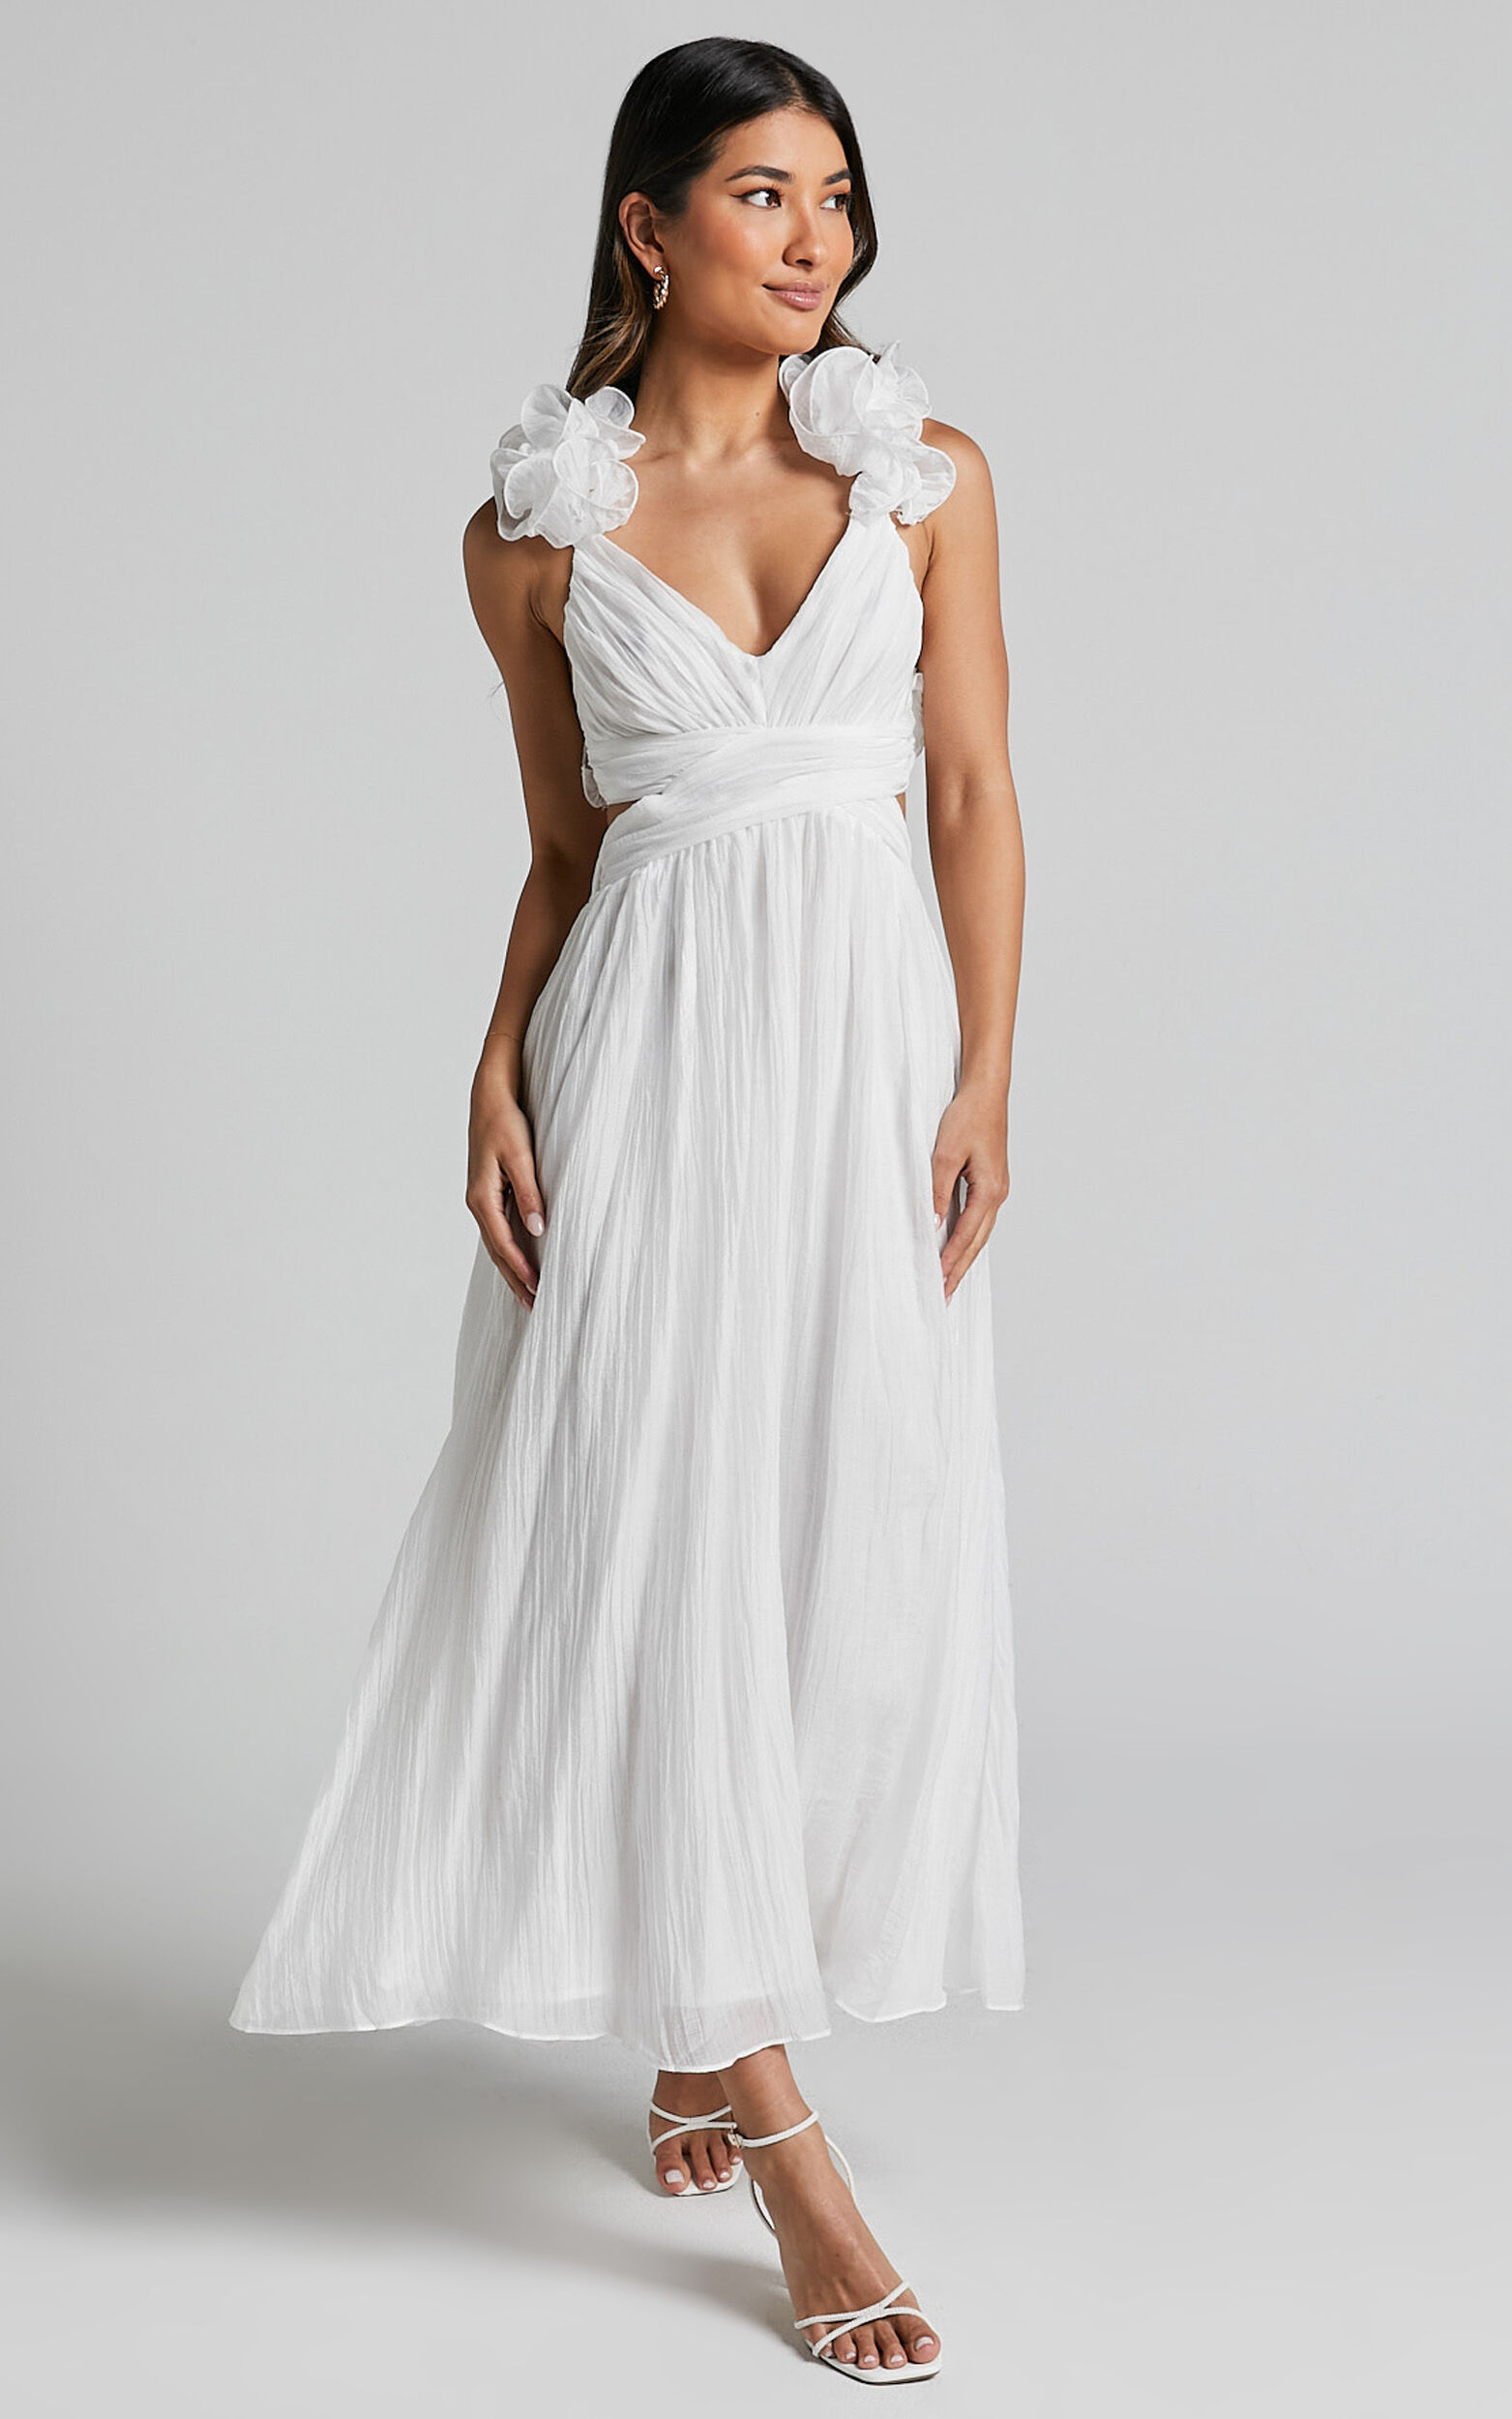 Marielly Maxi Dress - Side Cut Out V Neck Ruffle Detail Sleeve Dress in  White